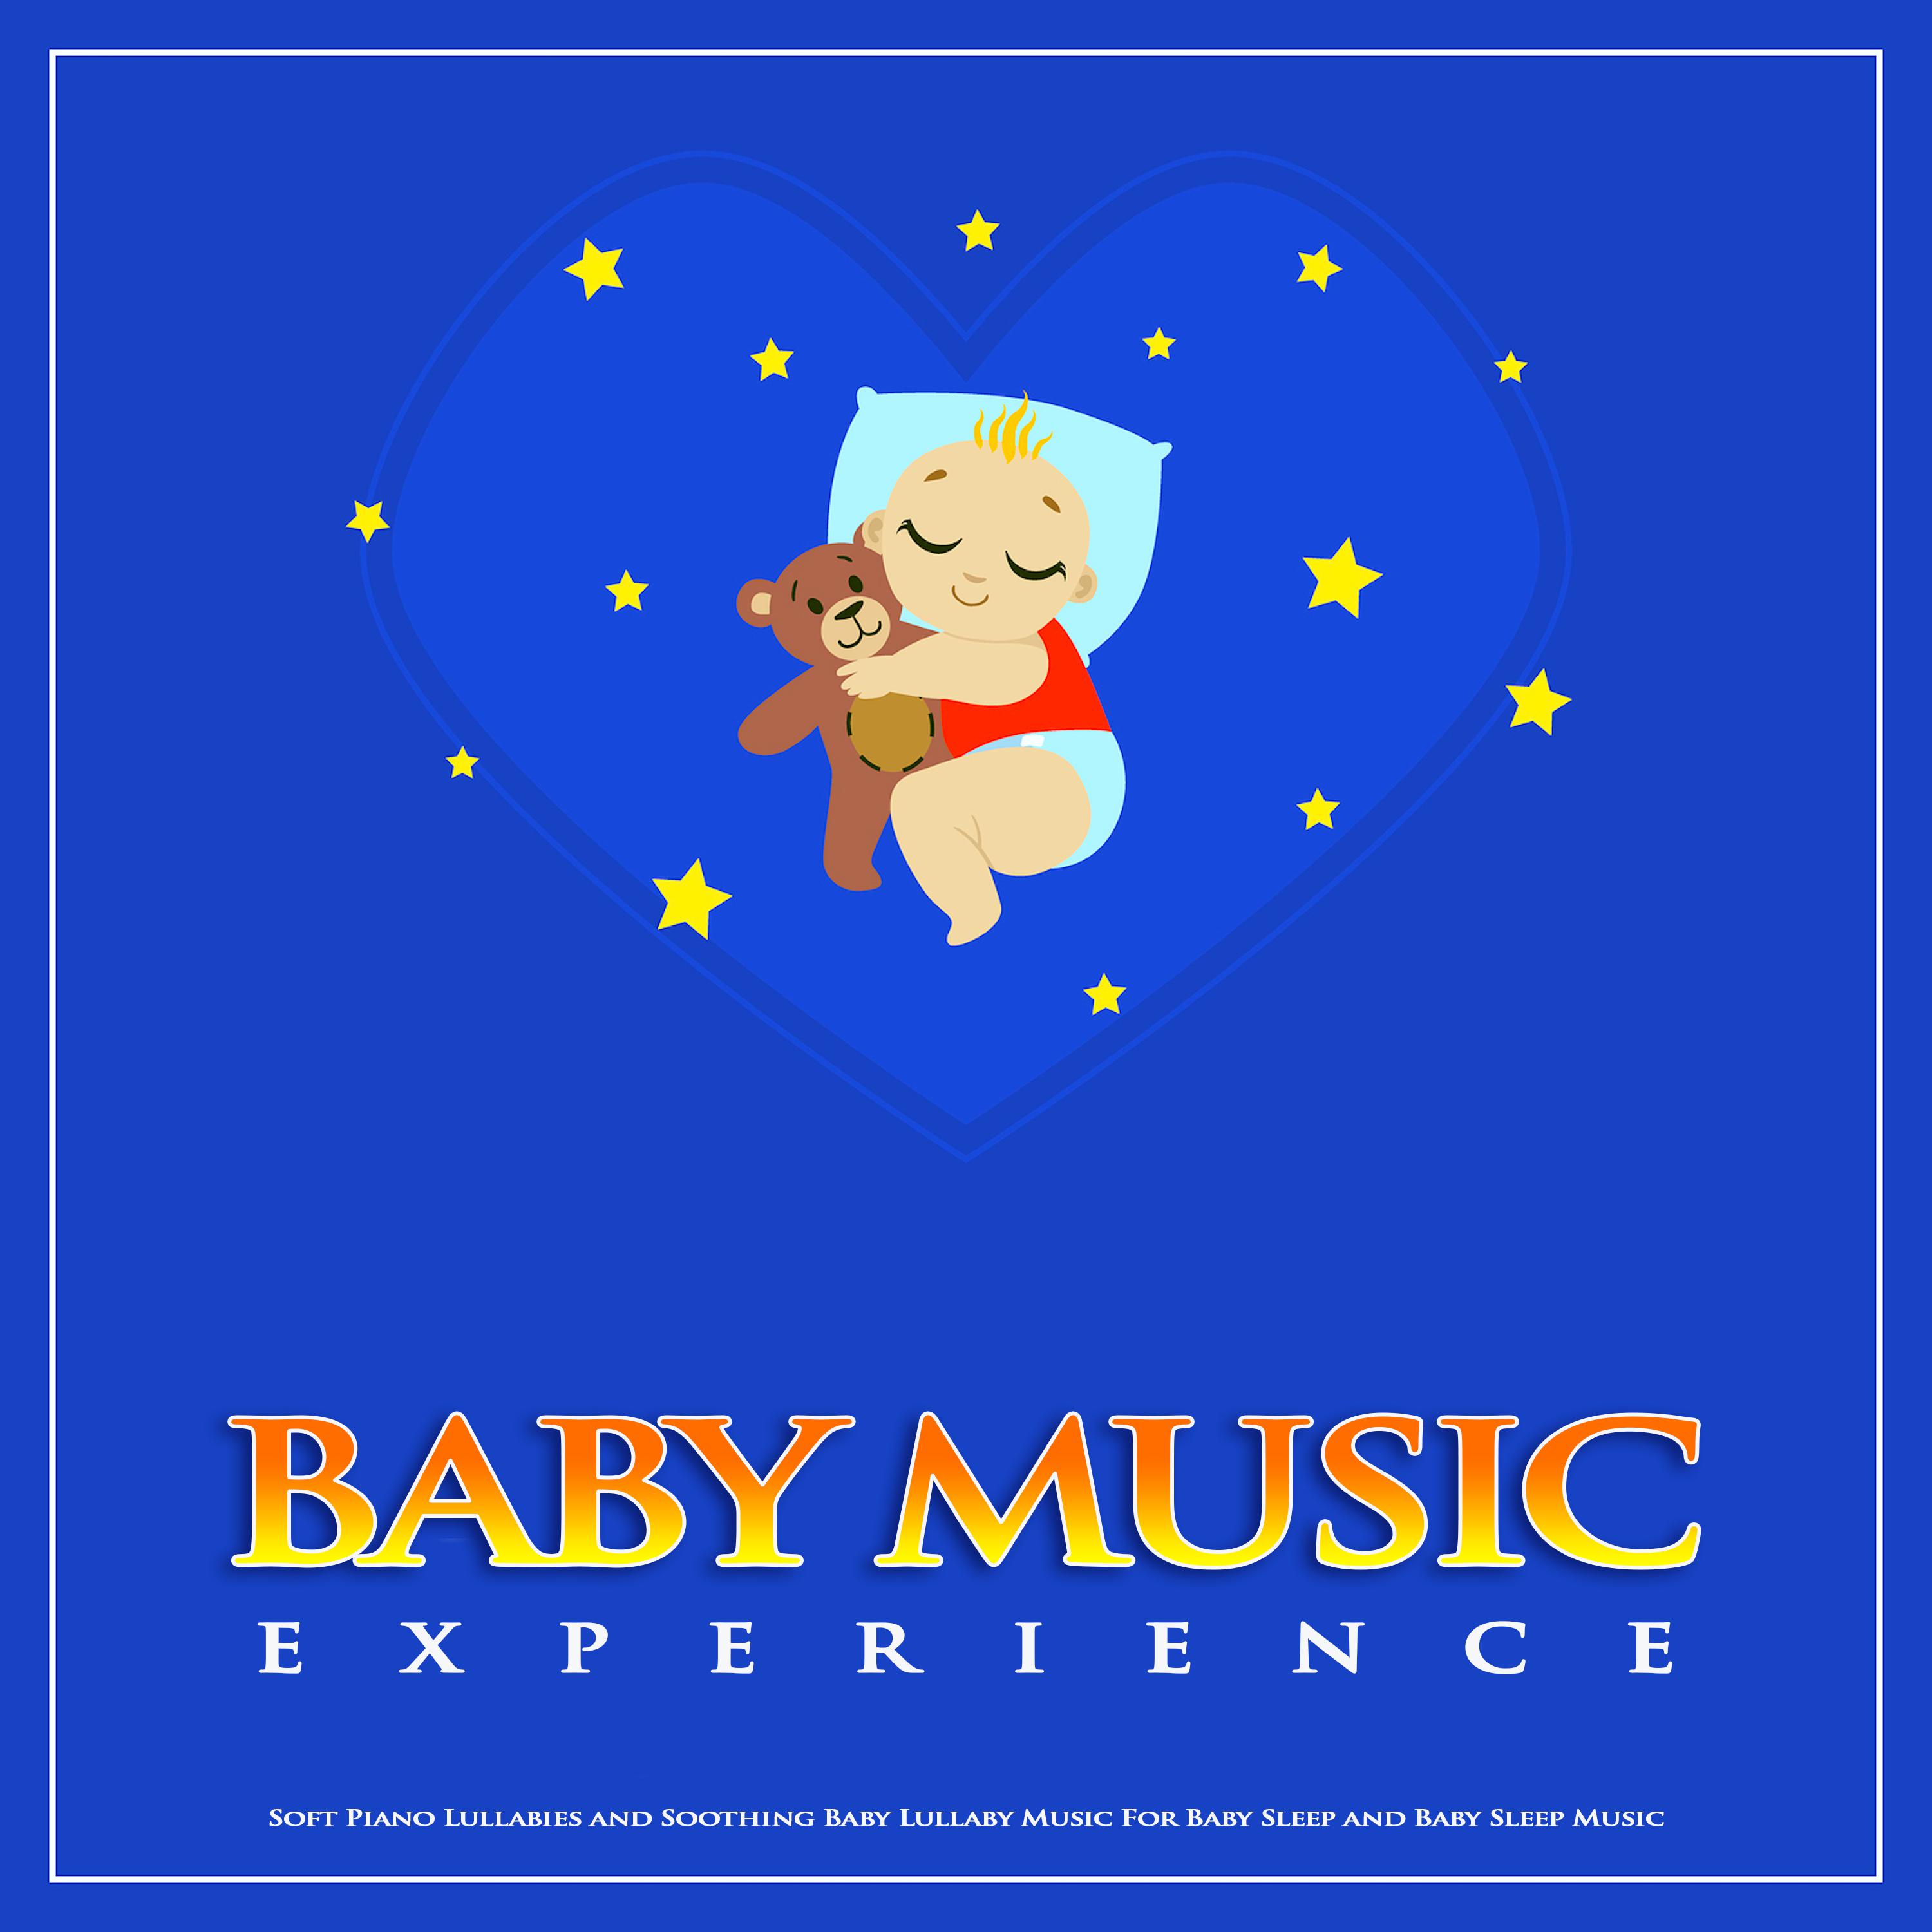 Baby Music Experience: Soft Piano Lullabies and Soothing Baby Lullaby Music For Baby Sleep and Baby Sleep Music